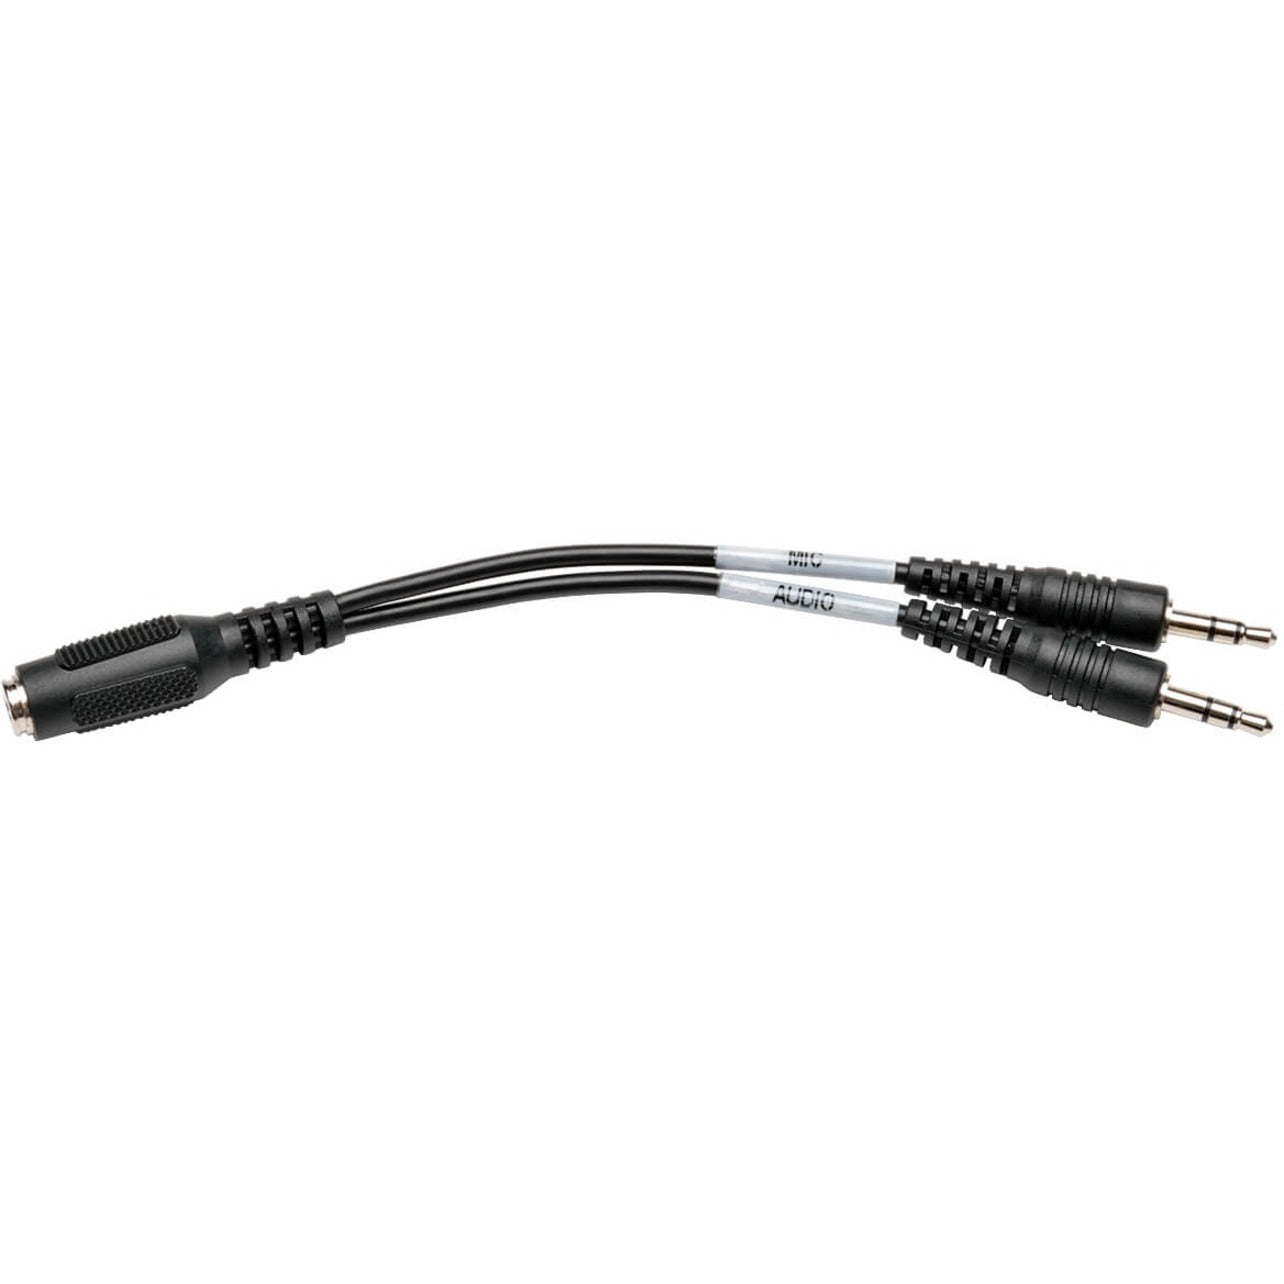 Tripp Lite P318-06N-FMM 6-in. 4-Position Female to (x2) 3-Position Male Audio Adapter Cable, Splitter Cable